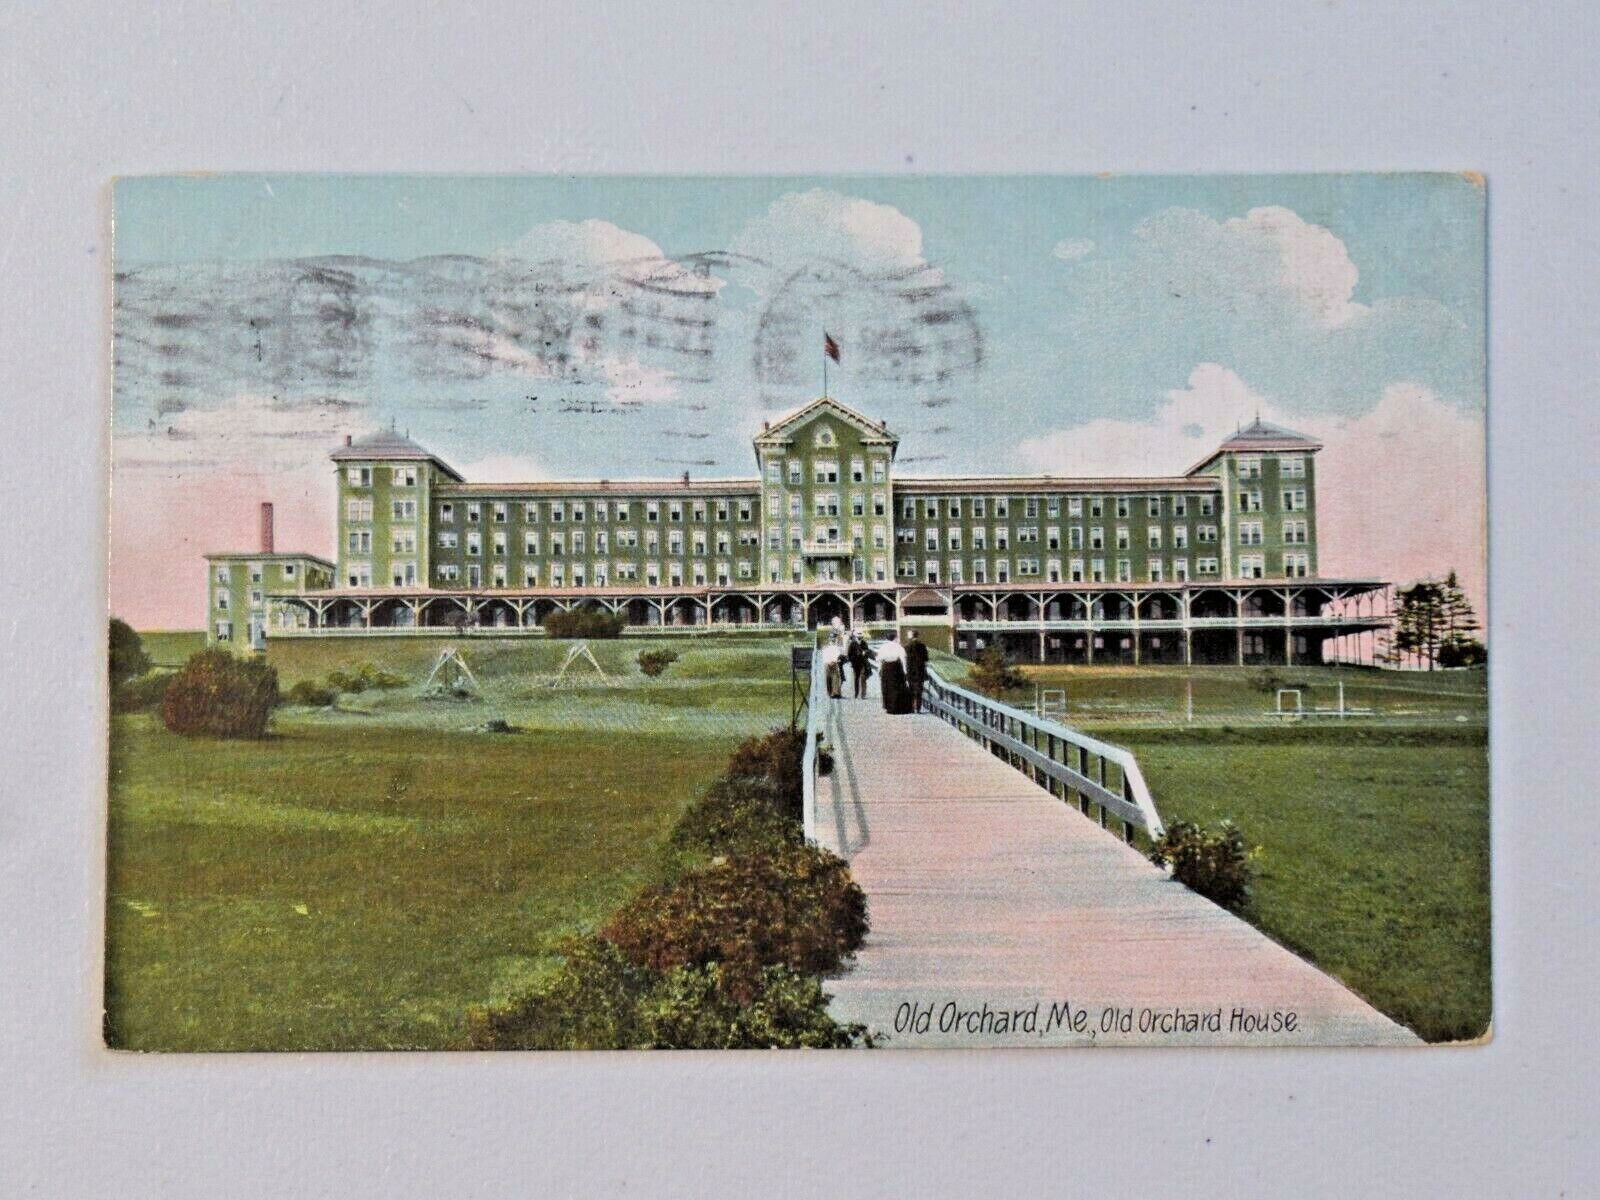 Old Orchard, ME Old Orchard House 1909 Postcard Leighton Mfg 7172